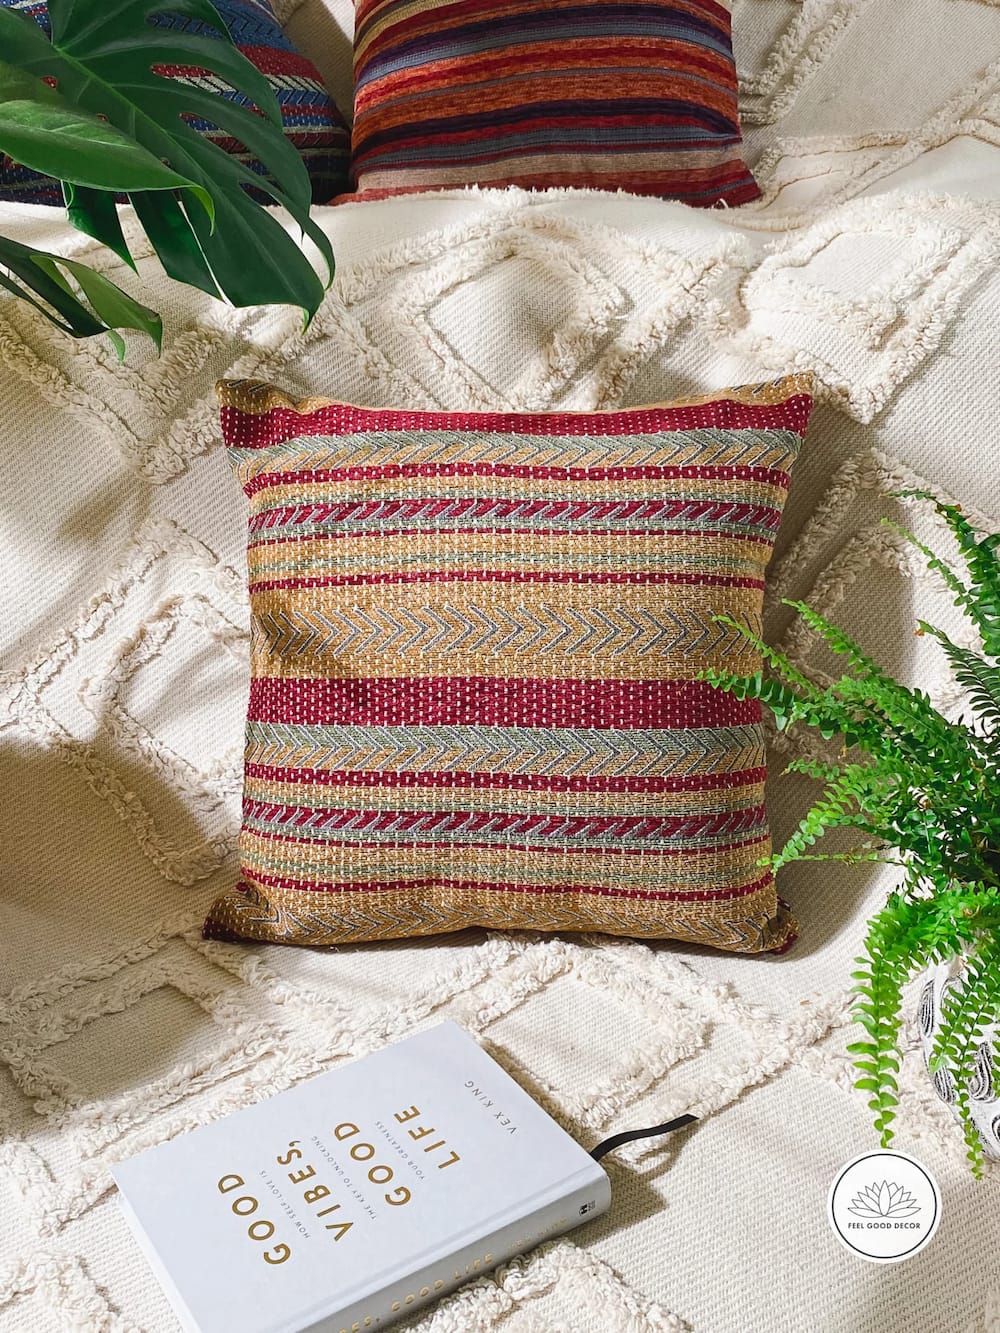 Cotton Embroidered Textured Pillow Cover - Boho Decorative Cushion